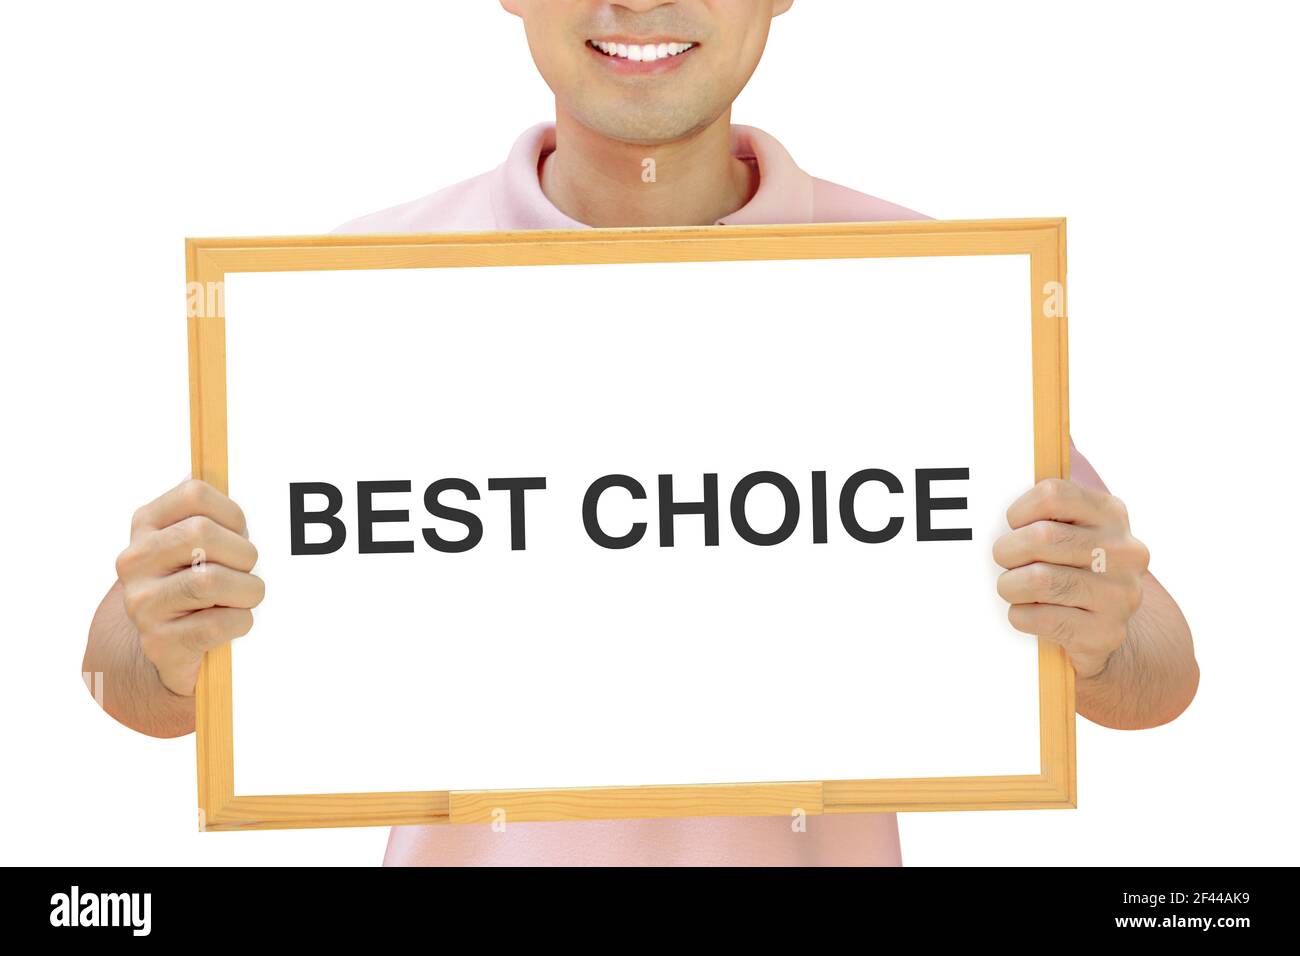 BEST CHOICE text on whiteboard held by smiling man Stock Photo